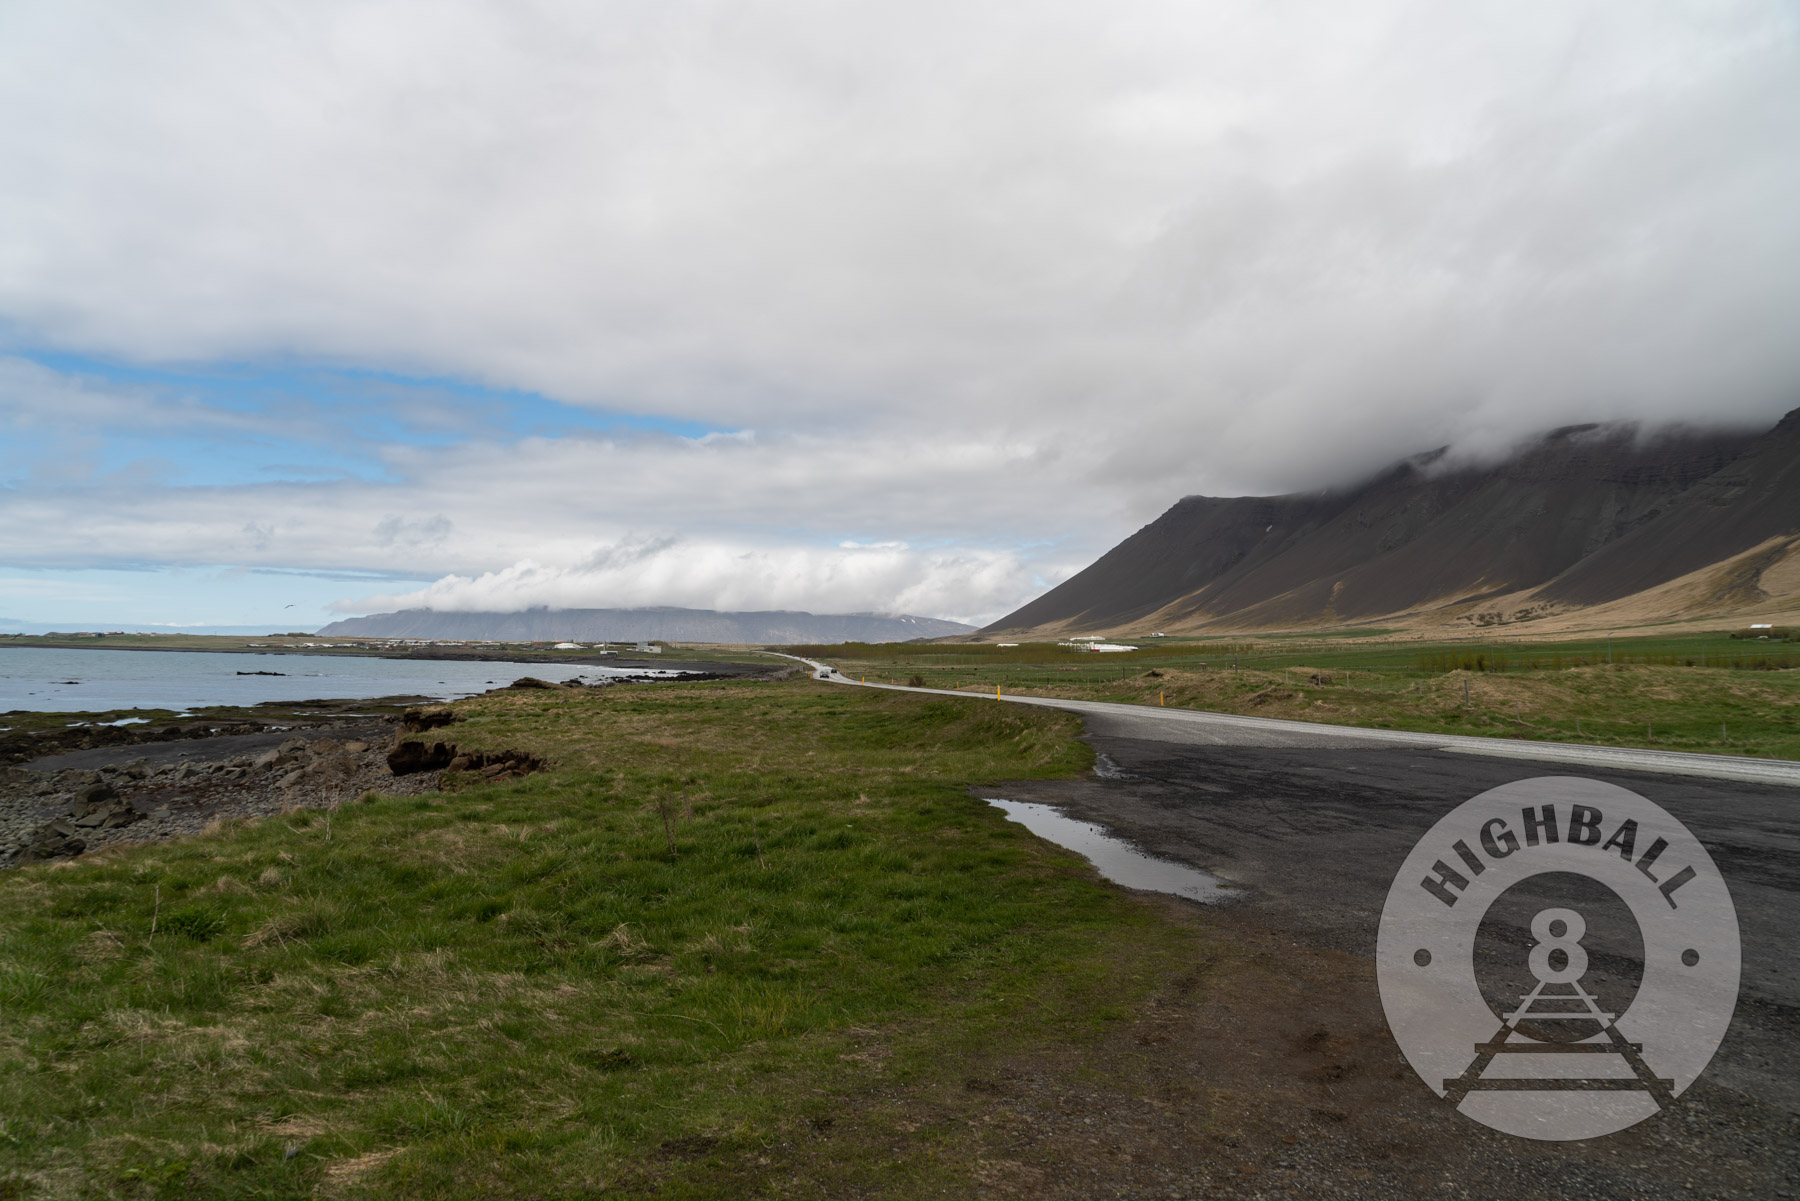 Looking north along Route 1 outside of Reykjavik, Iceland, 2018.